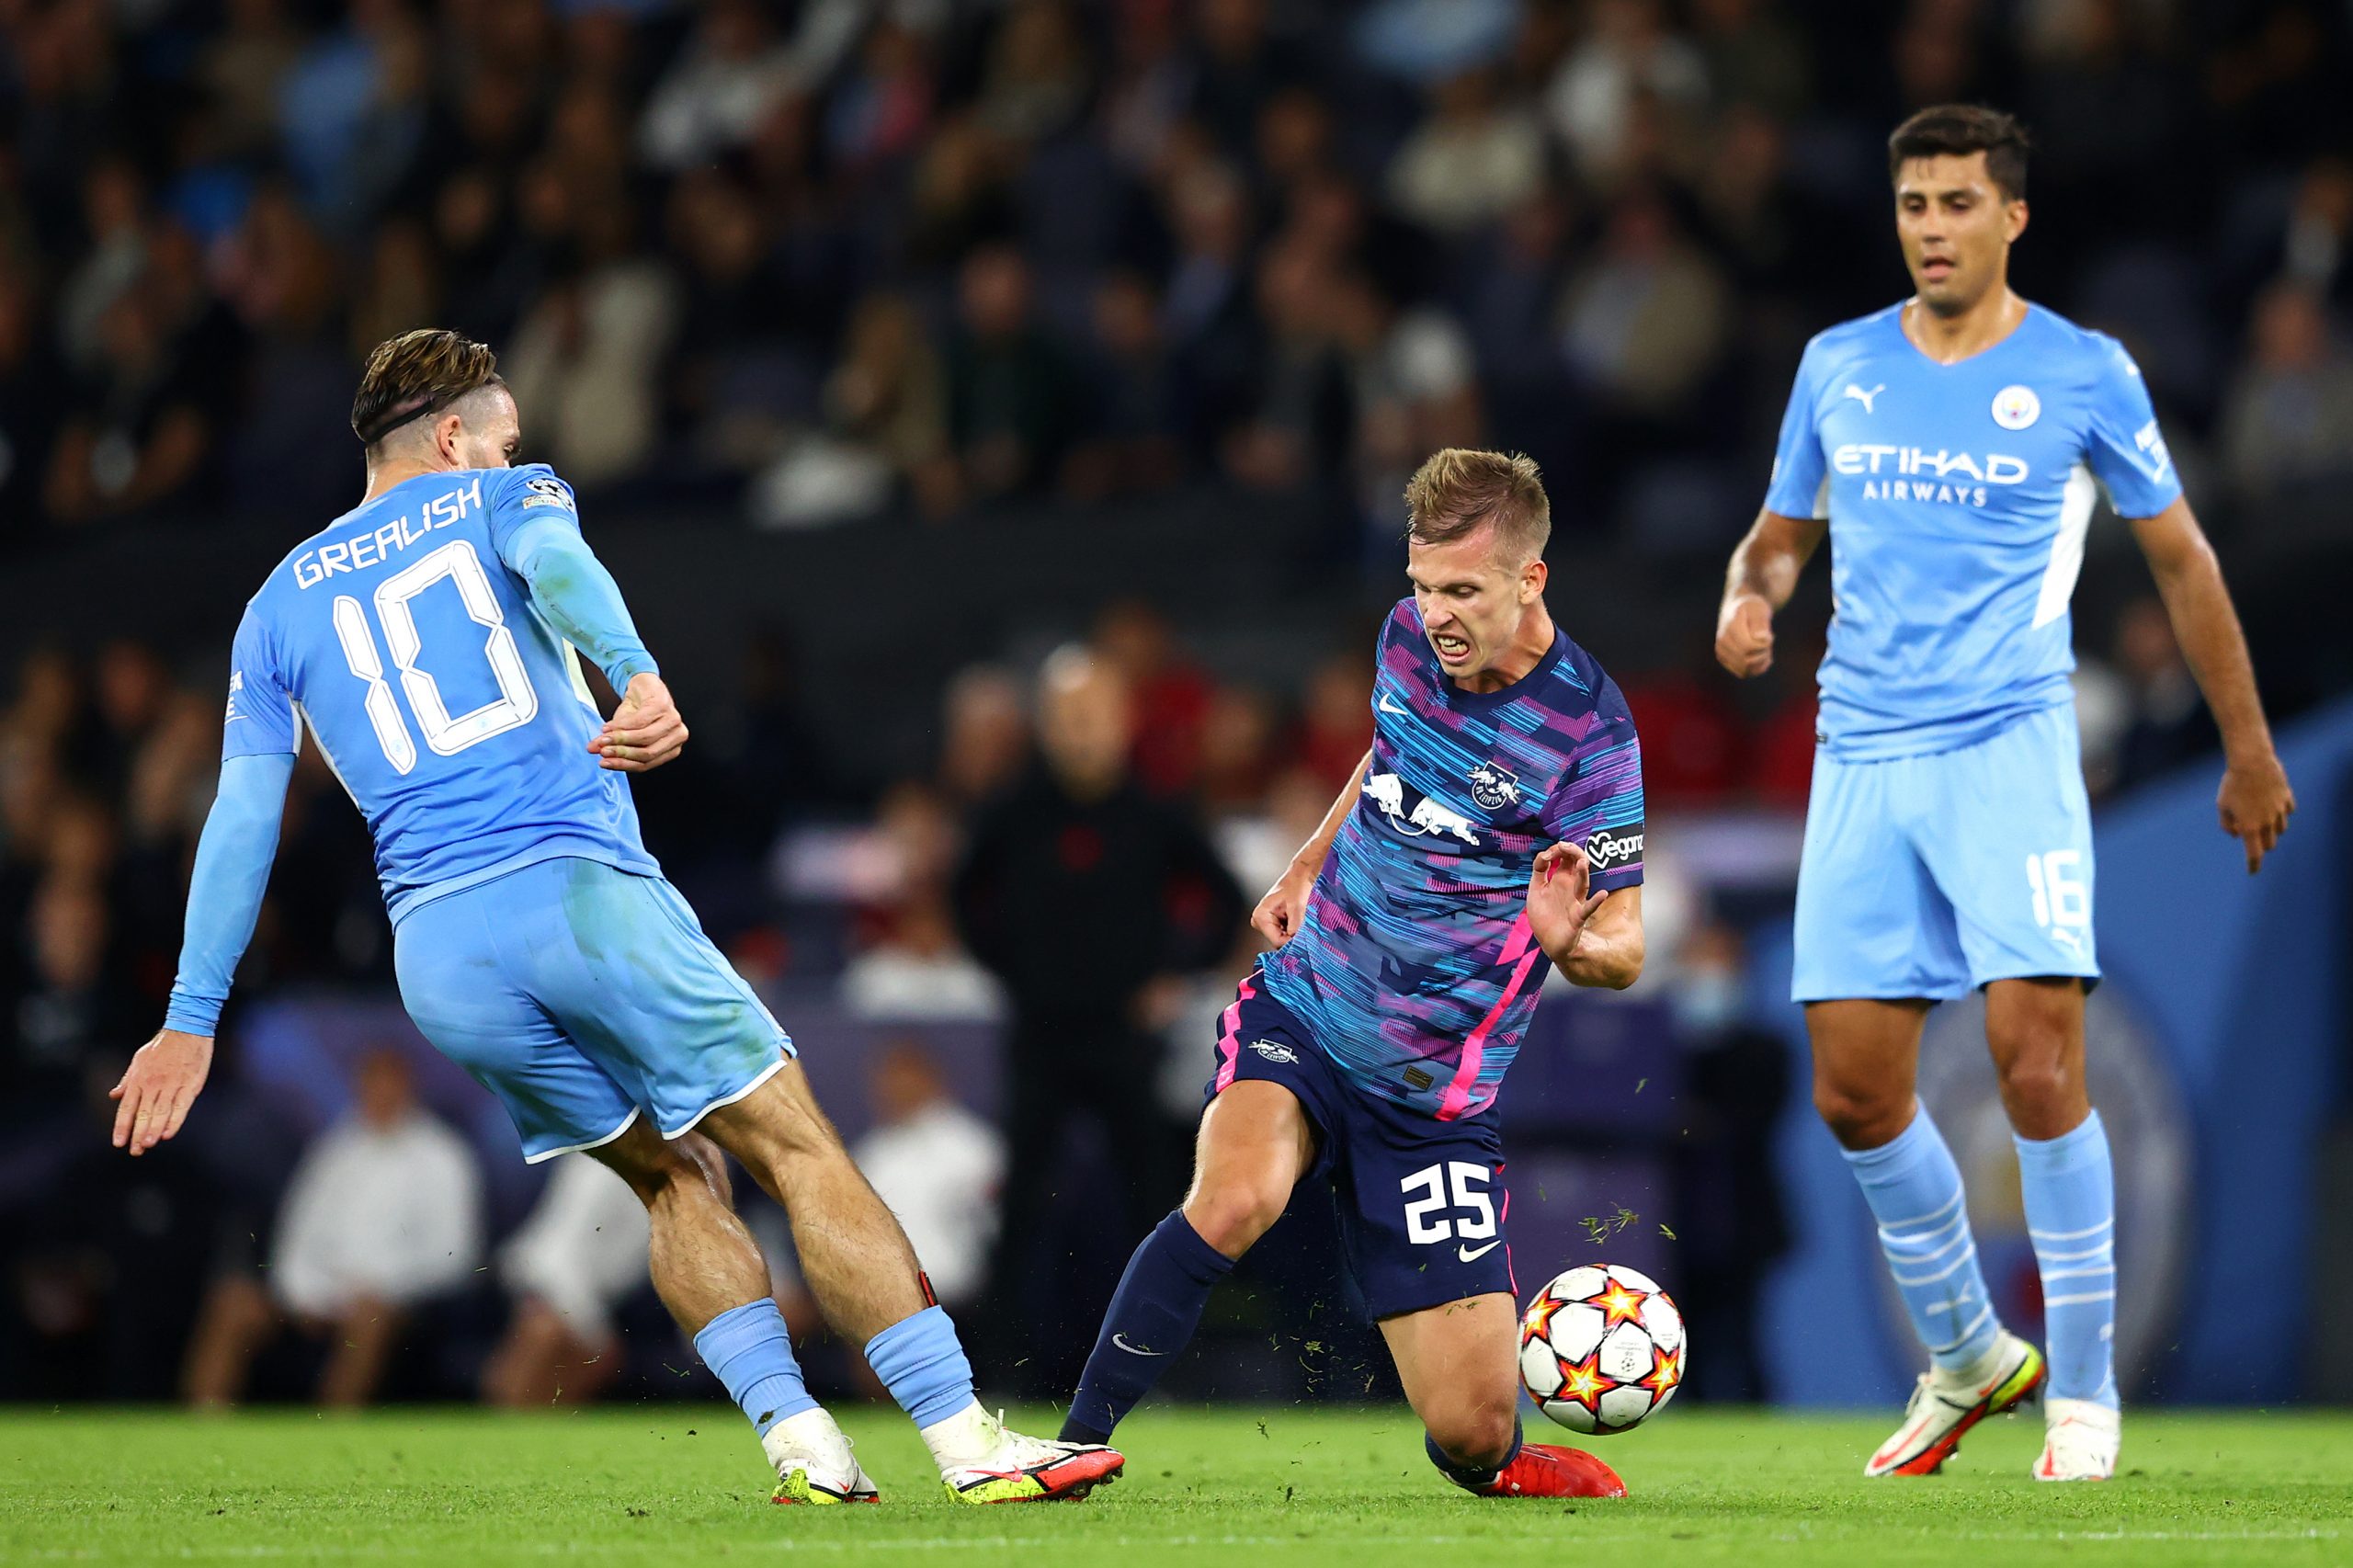 Dani Olmo of RB Leipzig and Jack Grealish of Manchester City battle for possession during the UEFA Champions League group A match between Manchester City and RB Leipzig.